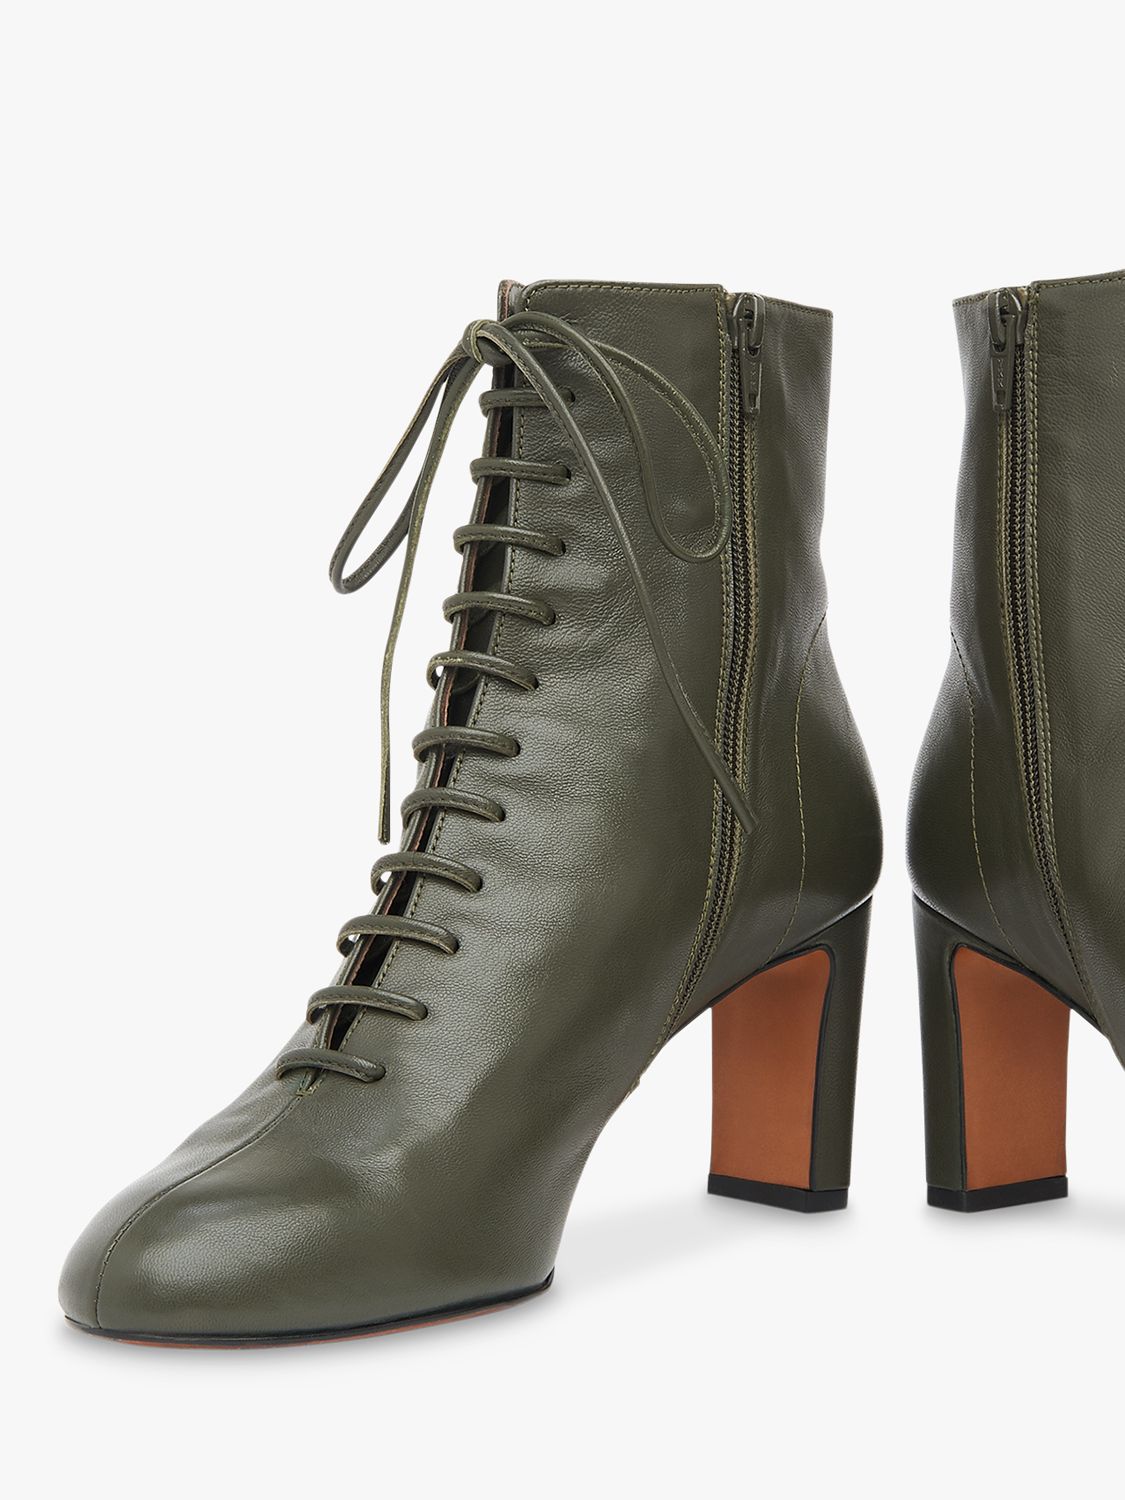 Whistles Dahlia Leather Lace Up Ankle Boots, Khaki at John Lewis & Partners